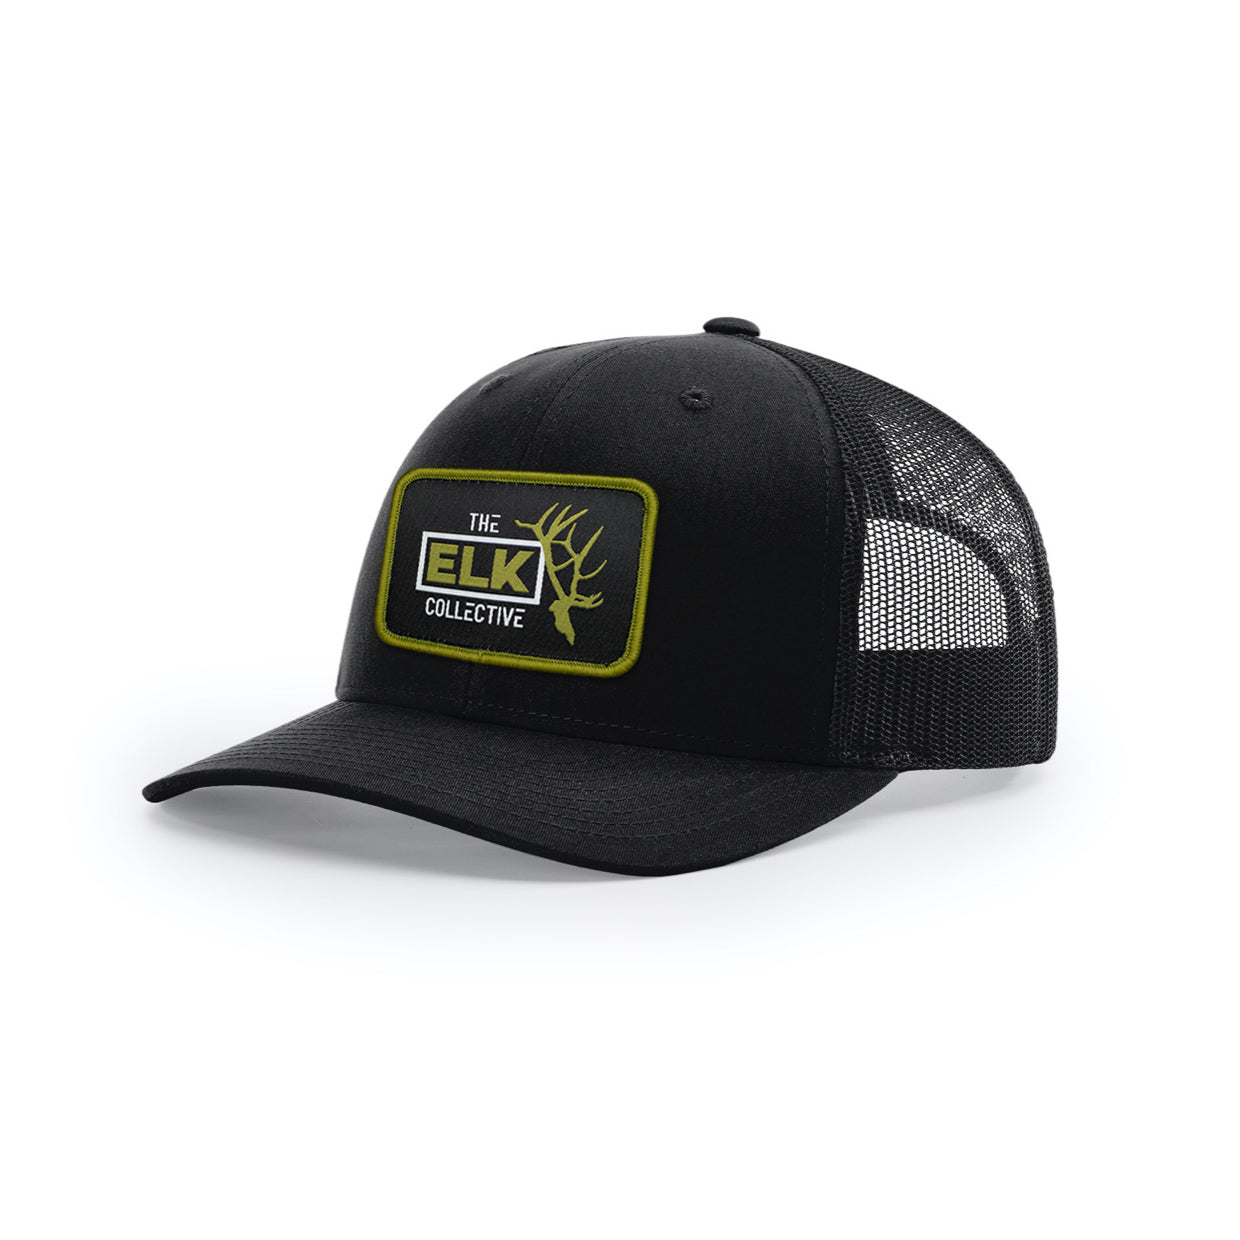 The Elk Collective Branded Patch Hat